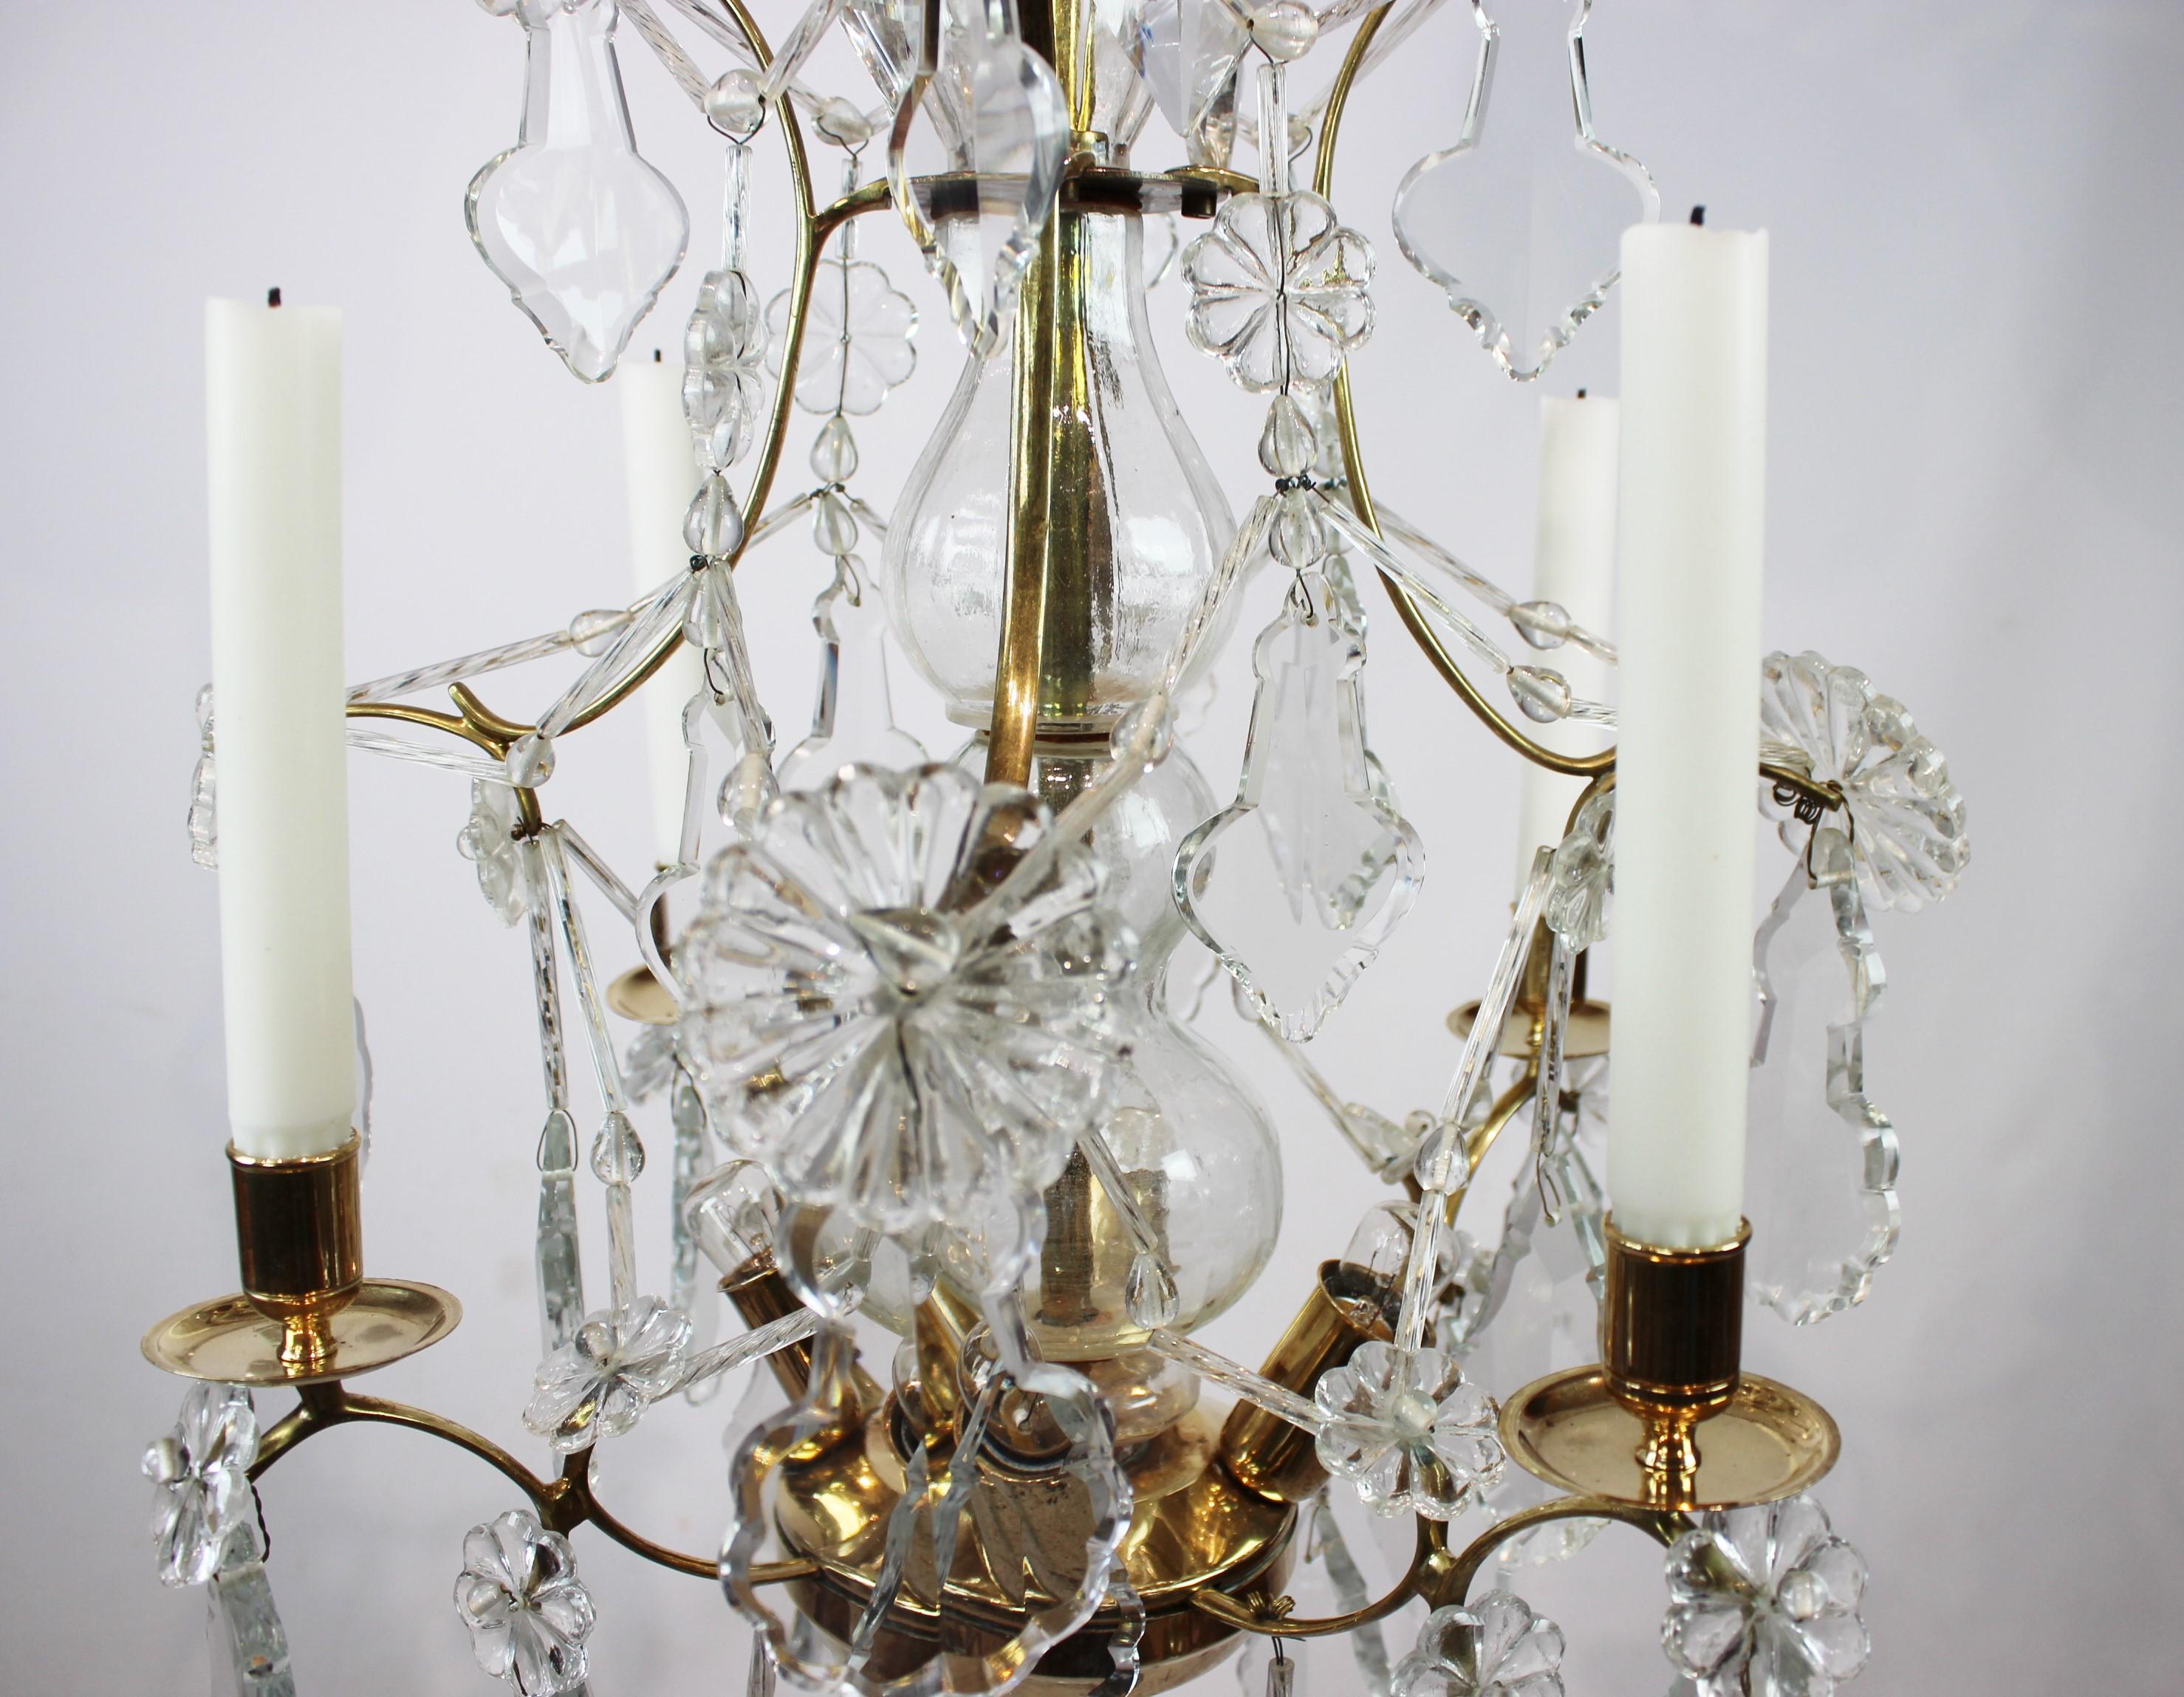 French Provincial Chandelier of Brass and Polished Prisms from France, circa 1920s